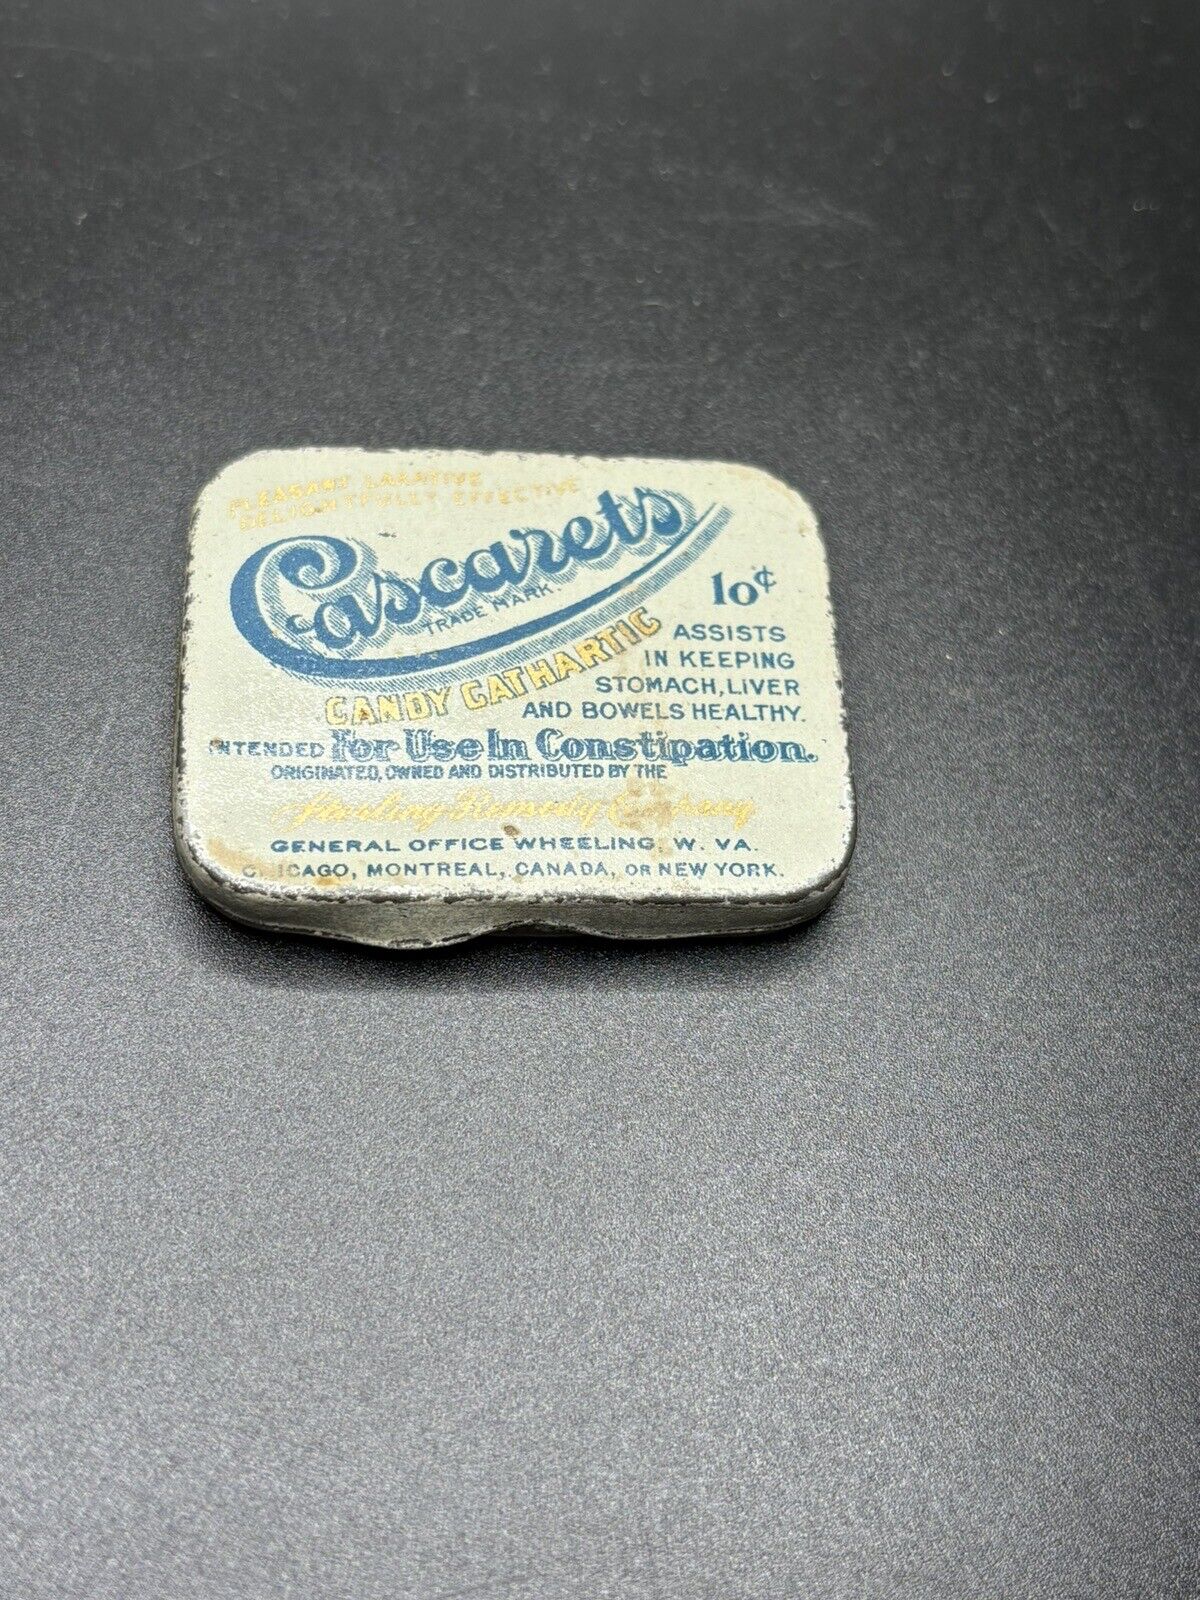 EARLY CASCARETS CANDY CATHARTIC EMPTY  CONSTIPATION TIN WHEELING WEST VIRGINIA 